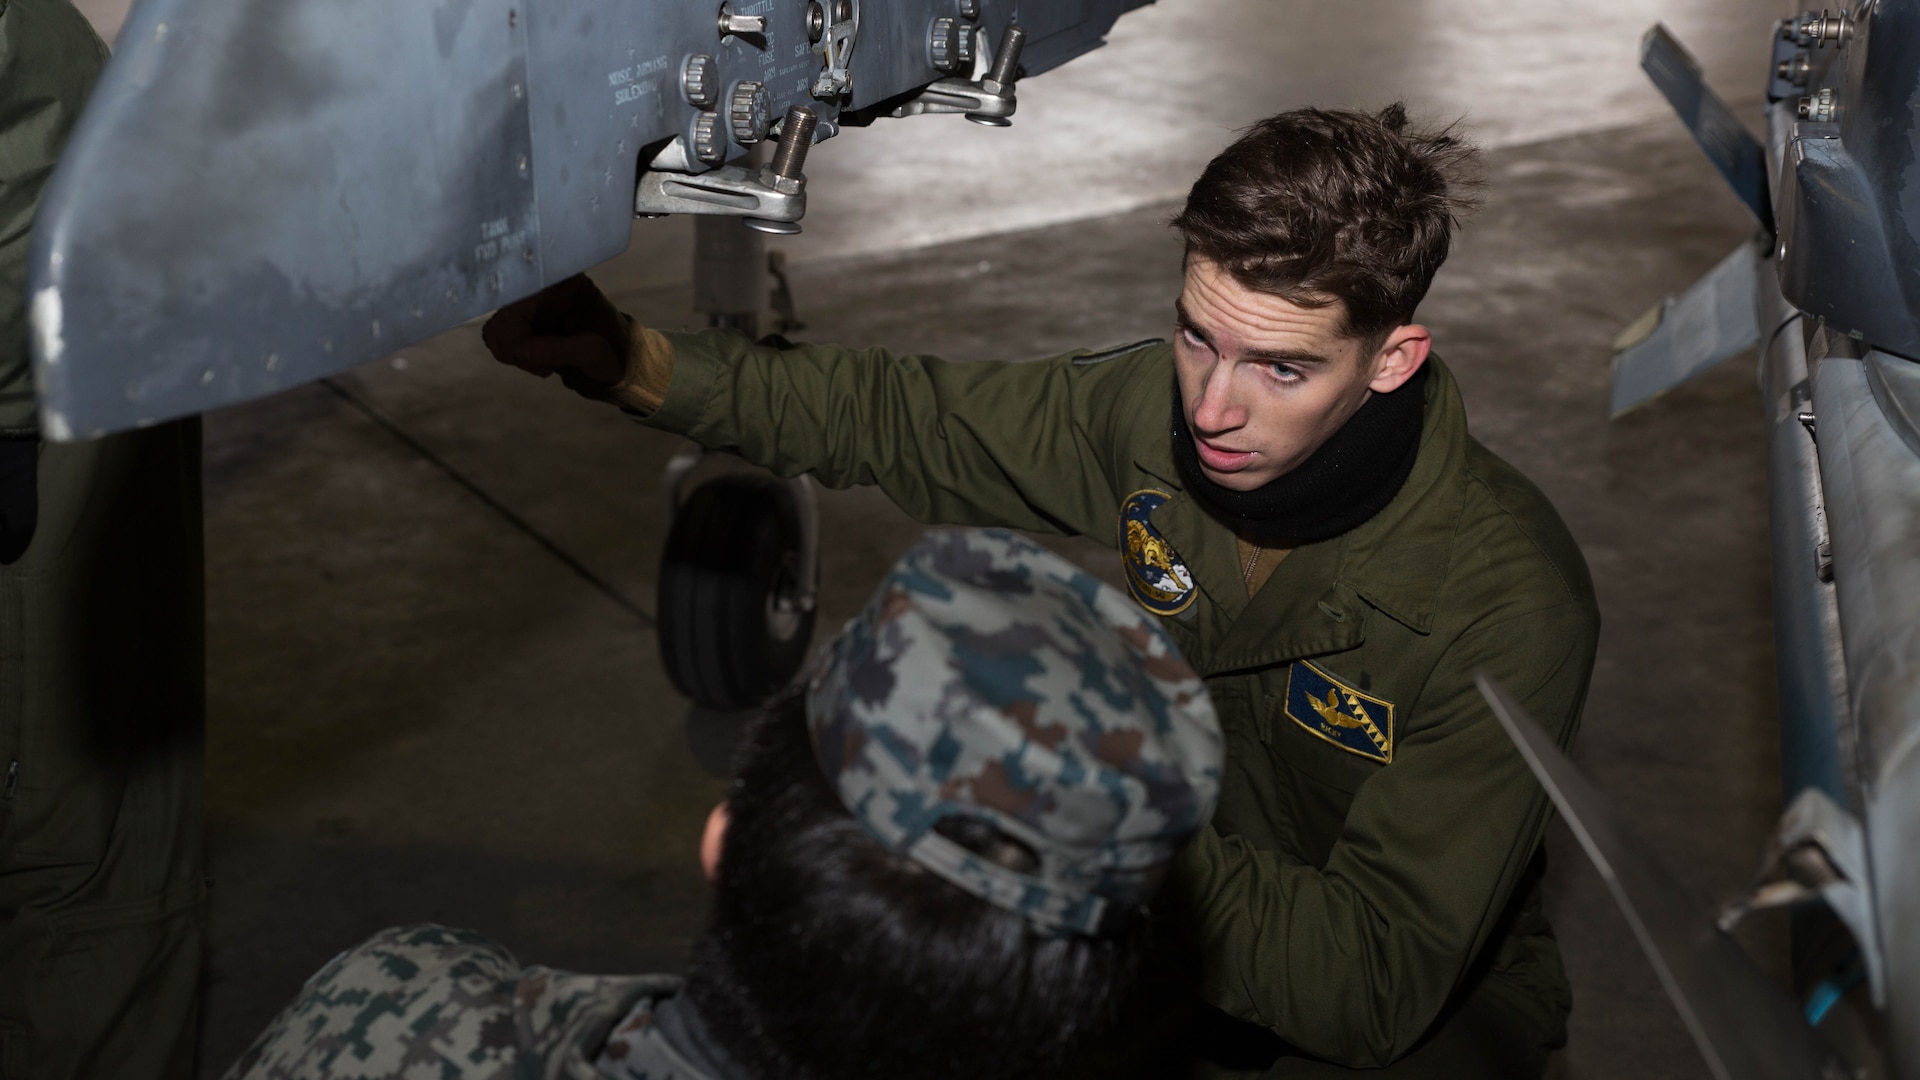 U.S. Marine Corps Cpl. Eli Gilbert, an ordnance technician with Marine Attack Squadron (VMA) 542, explains how parts of an AV-8B Harrier work to a member of the Japan Air Self Defense Force at Chitose Air Base, Japan, Dec. 9, 2016. JASDF personnel joined the VMA-542 Marines in their hangar to get a closer look and better understanding of the squadrons Harriers. (U.S. Marine Corps photo by Lance Cpl. Joseph Abrego)